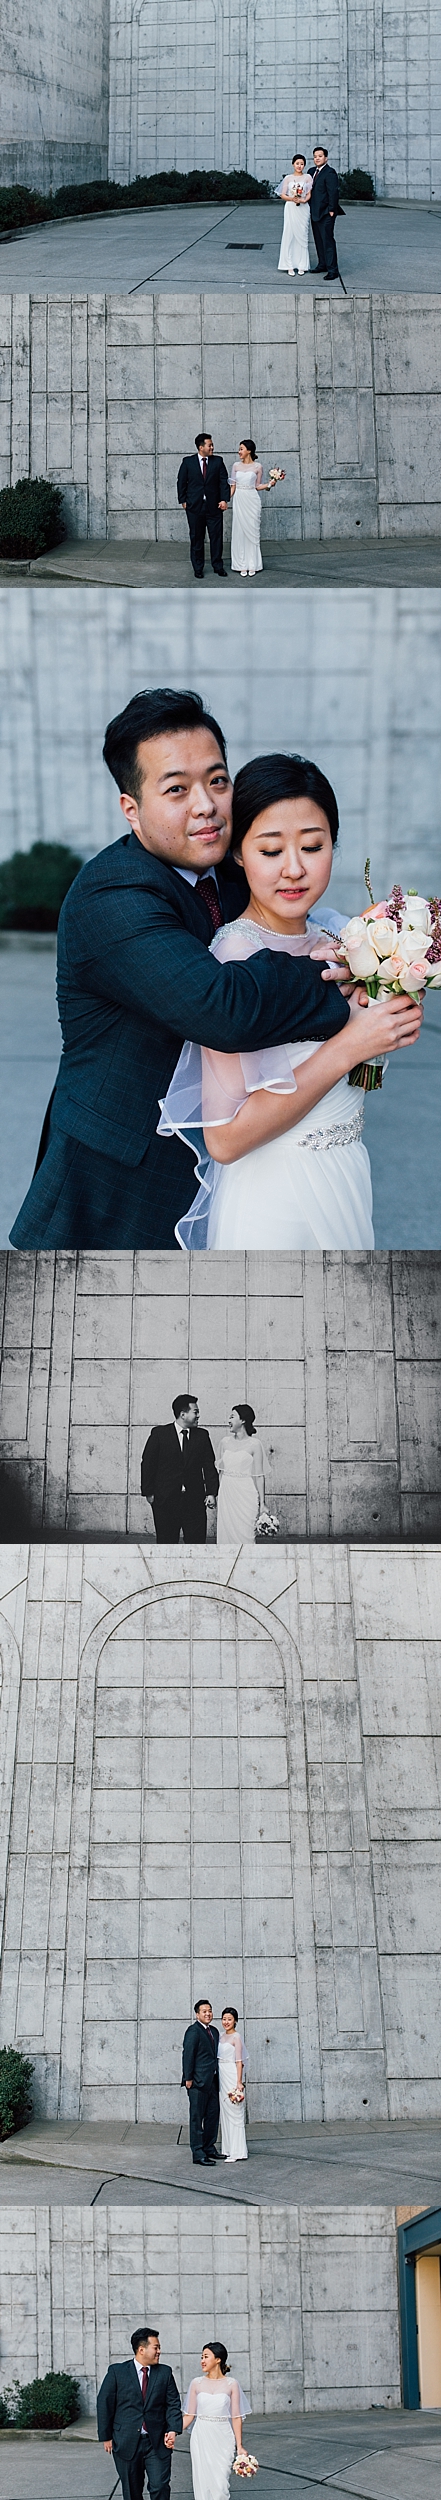 Seattle Courthouse Wedding Photographer PNW elopement Photography - Annie & Alan - Ashley Vos Photography-6.jpg